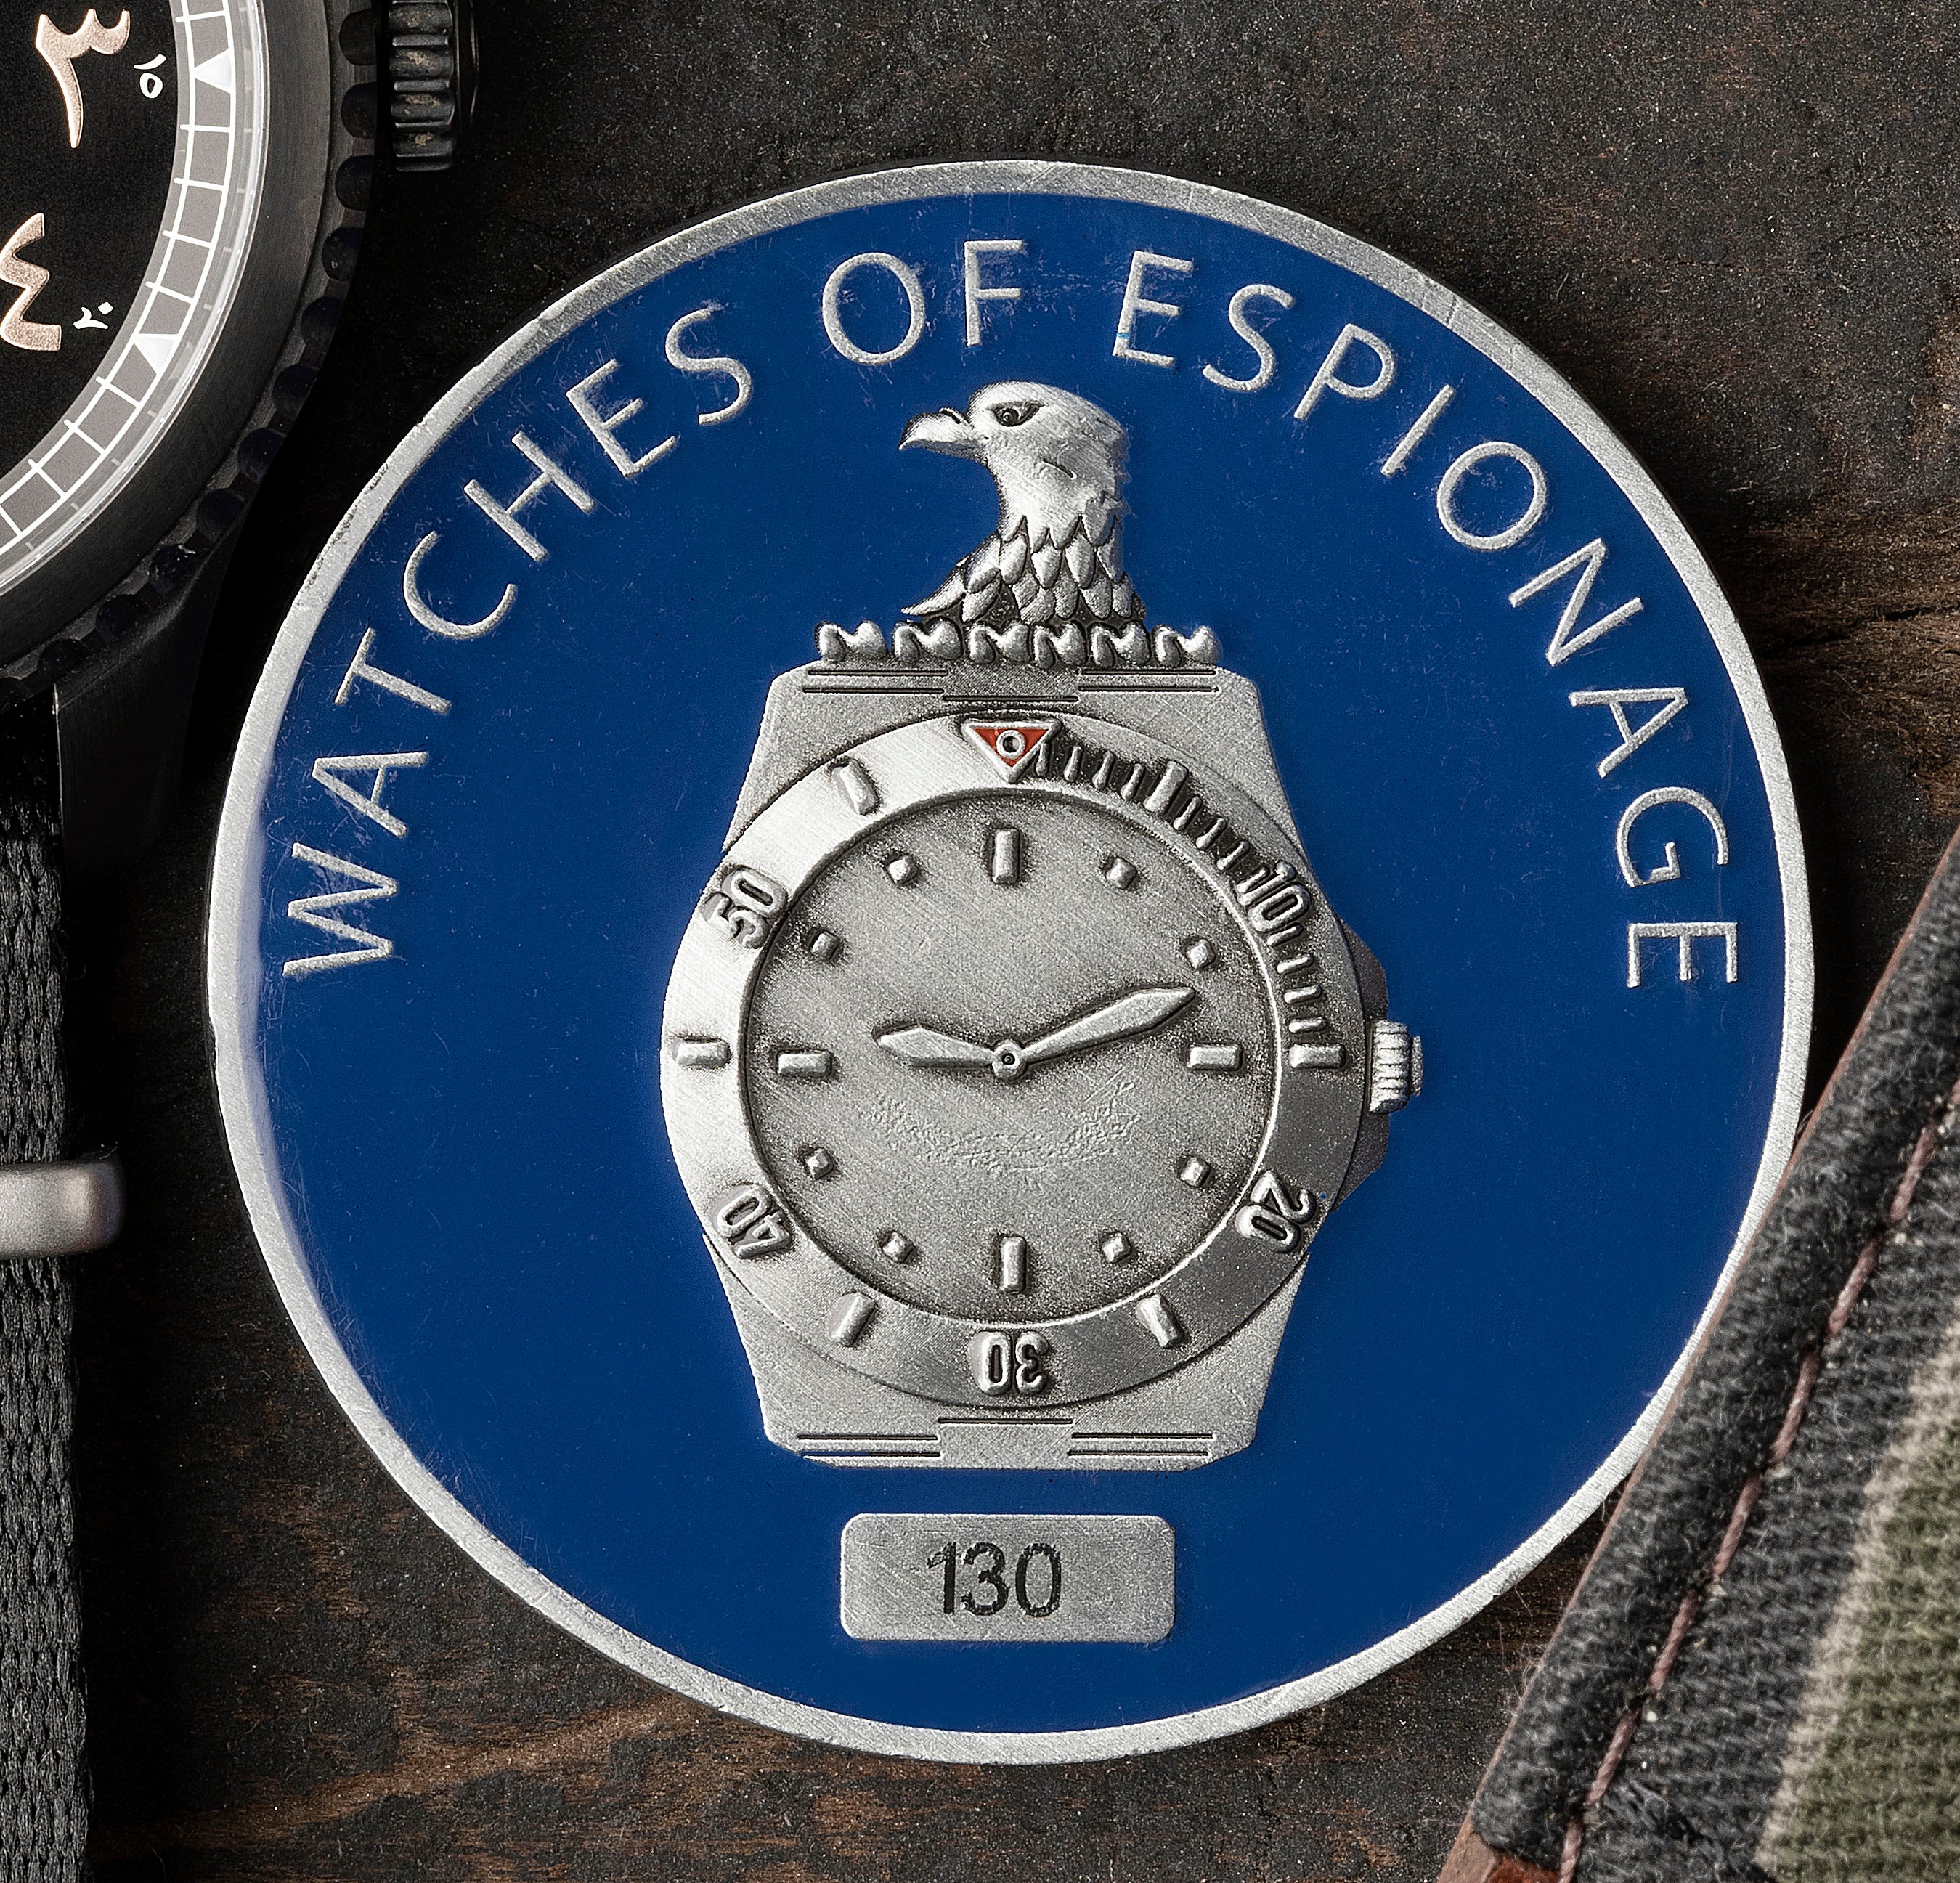 Ask Watches Of Espionage Anything, Part III